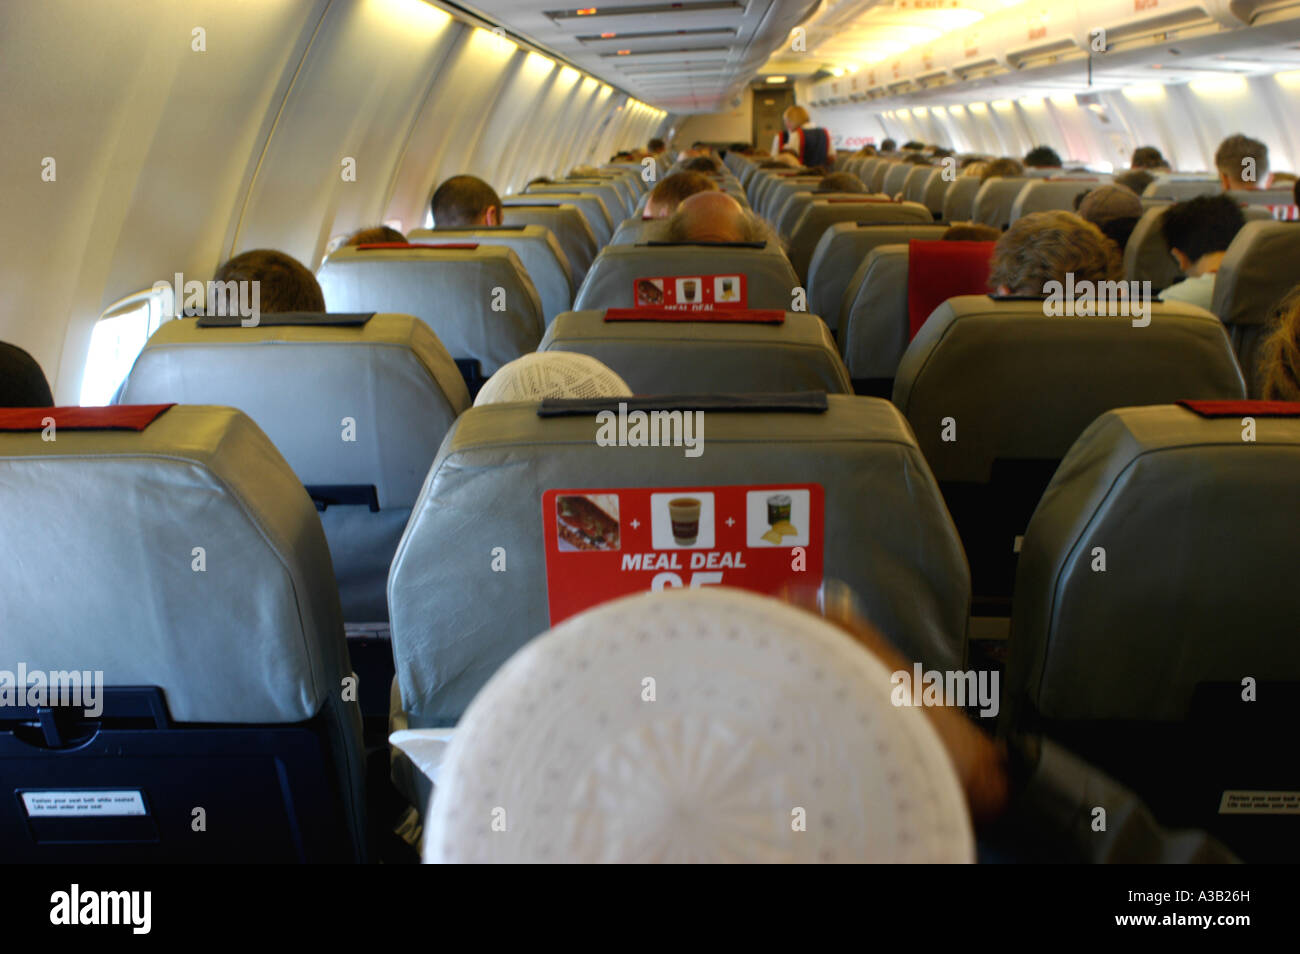 Budget airline travel The view from the back of a 747 passenger aeroplane cabin Stock Photo